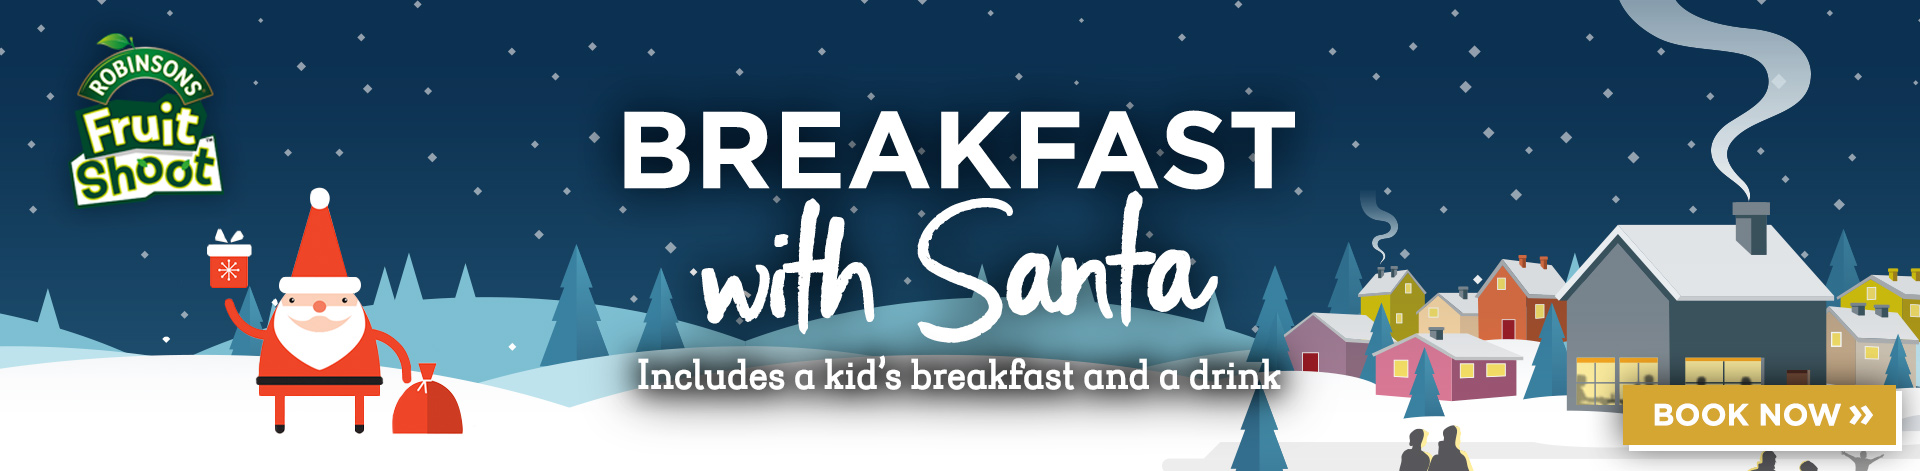 Breakfast with Santa menu at The Plume of Feathers